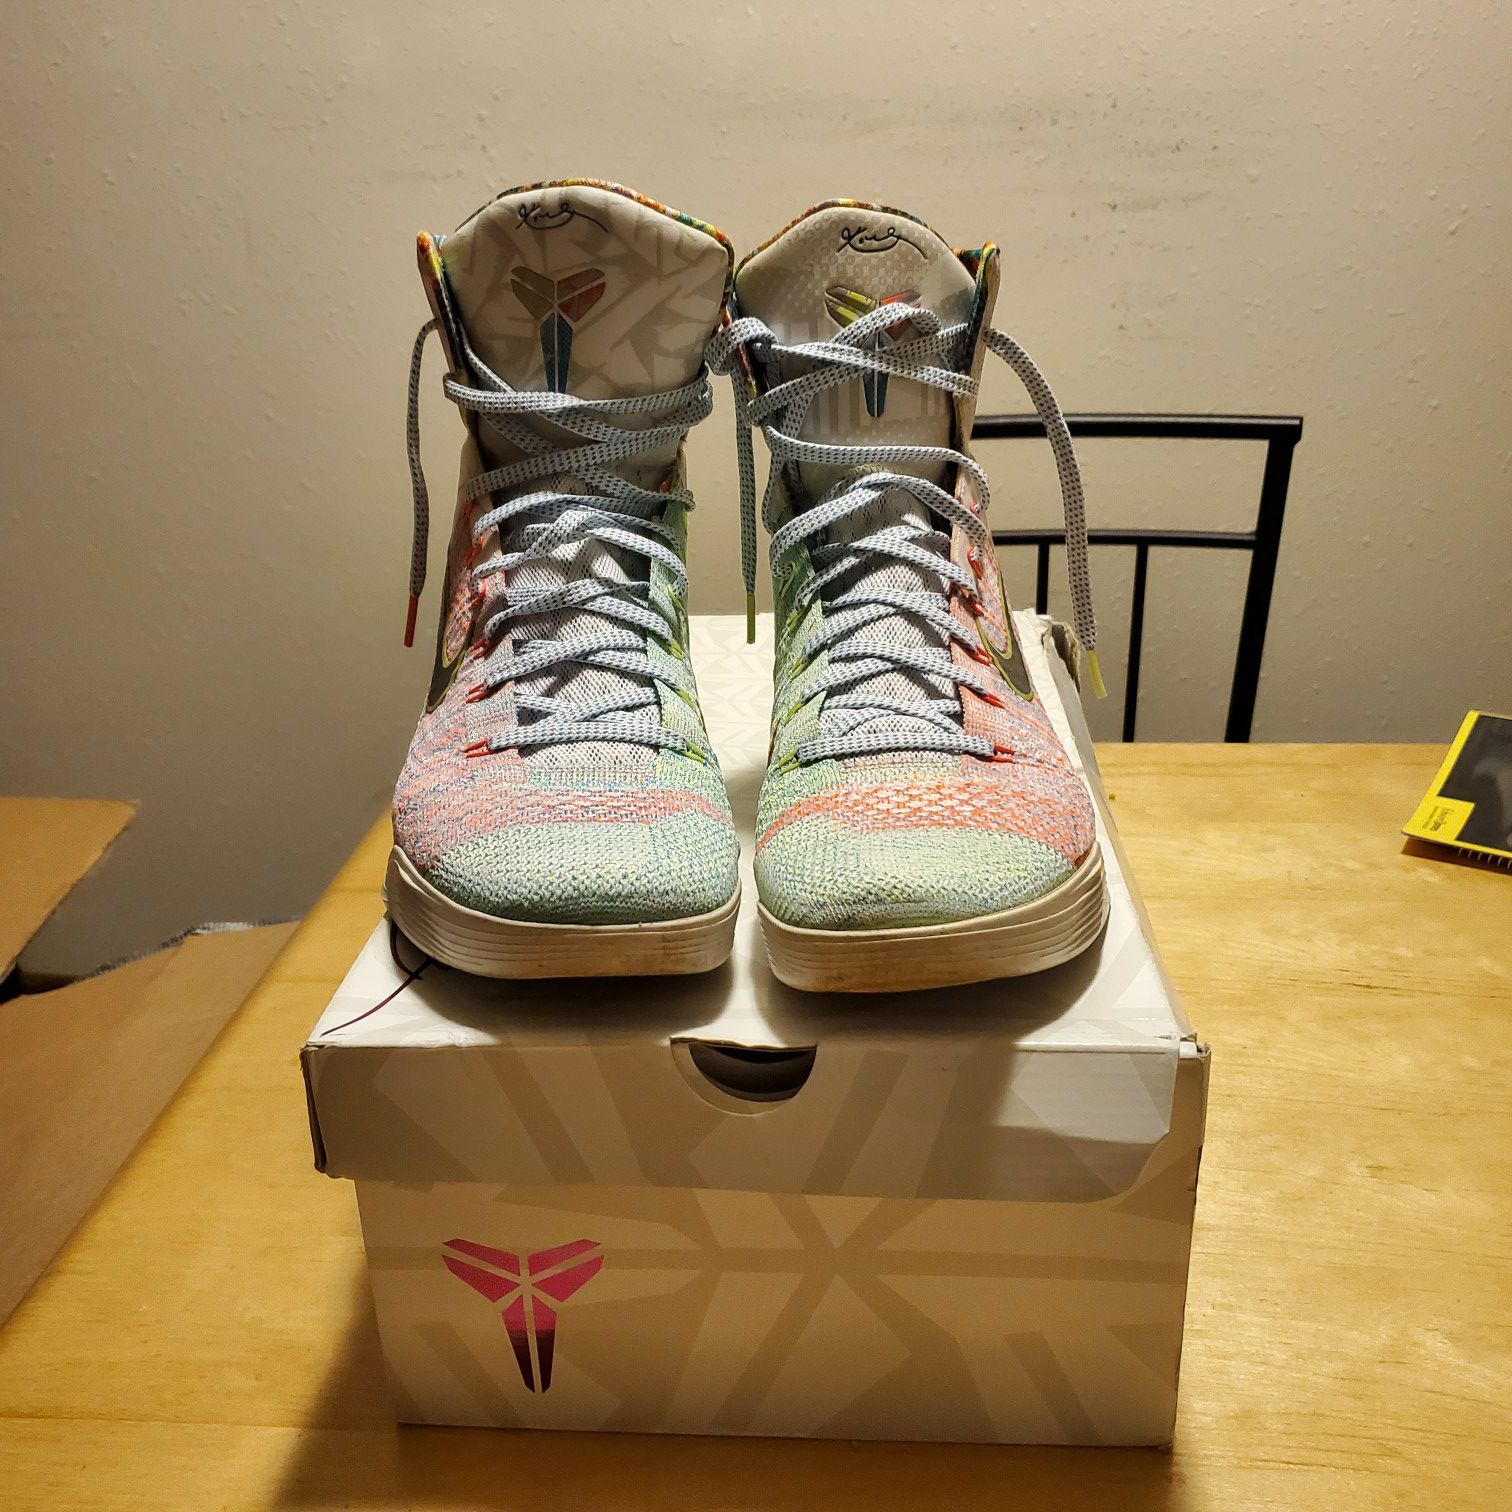 Kobe 9 high 'what the' 100% Authentic